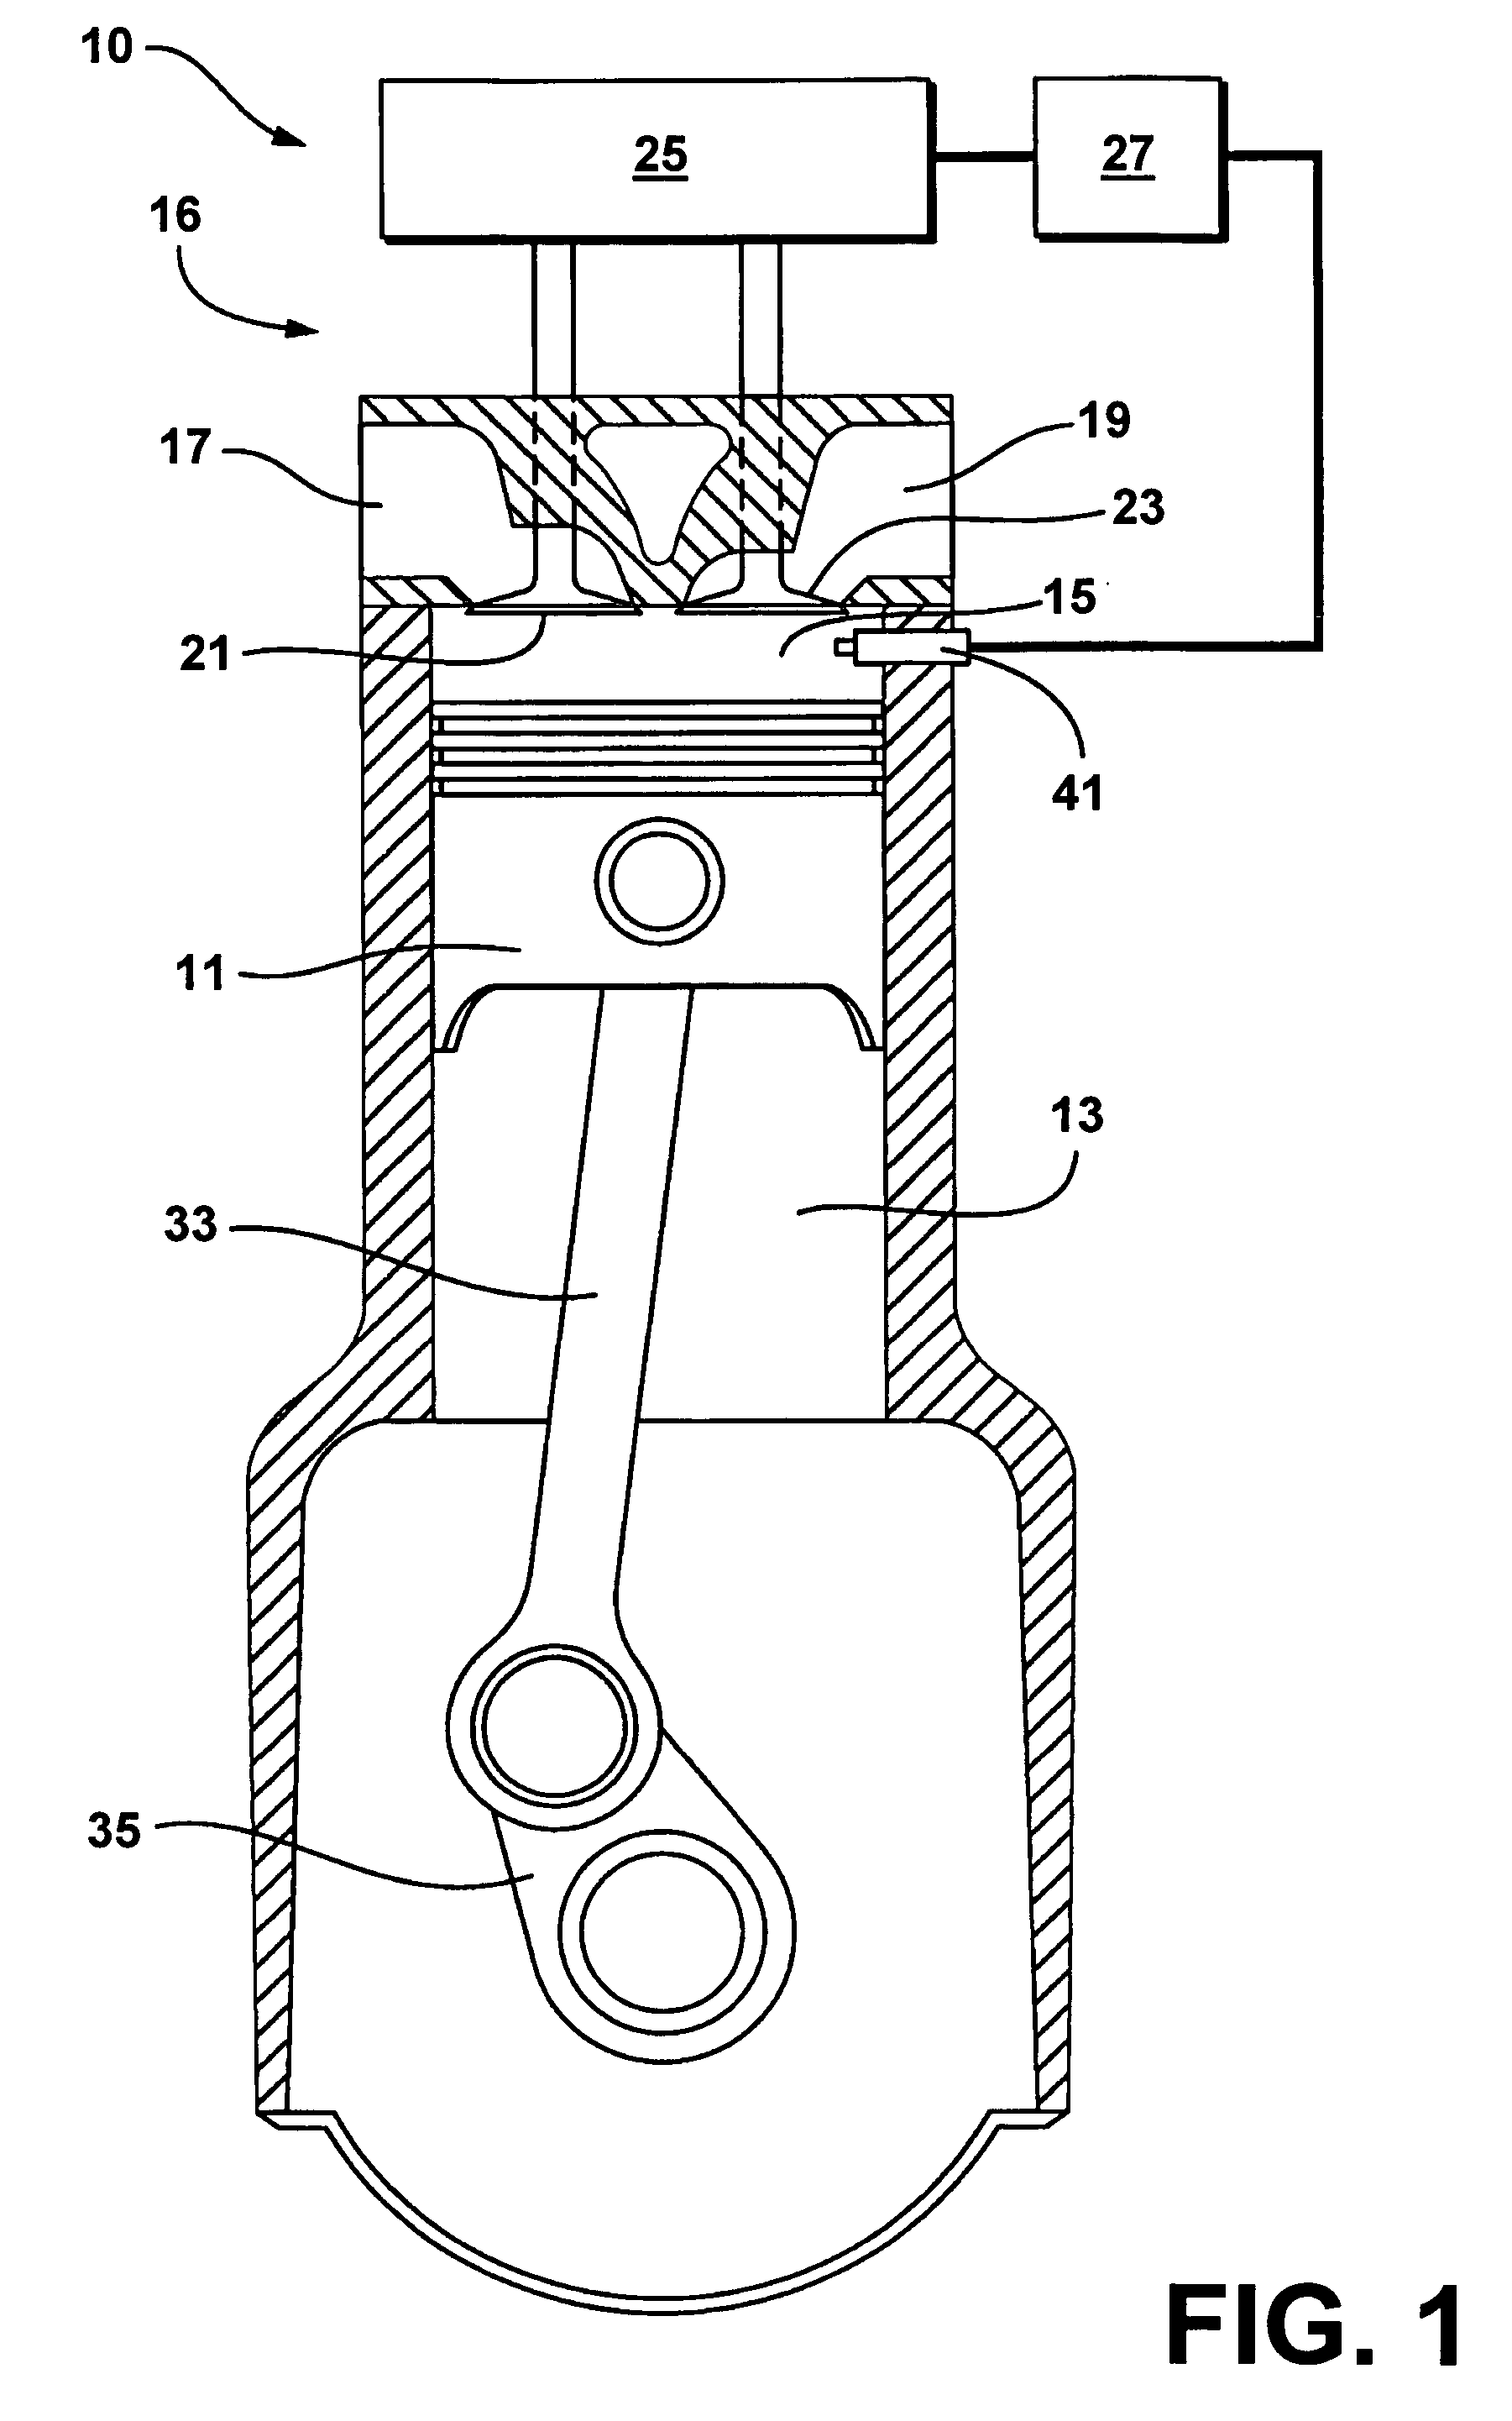 Valve and fueling strategy for operating a controlled auto-ignition four-stroke internal combustion engine